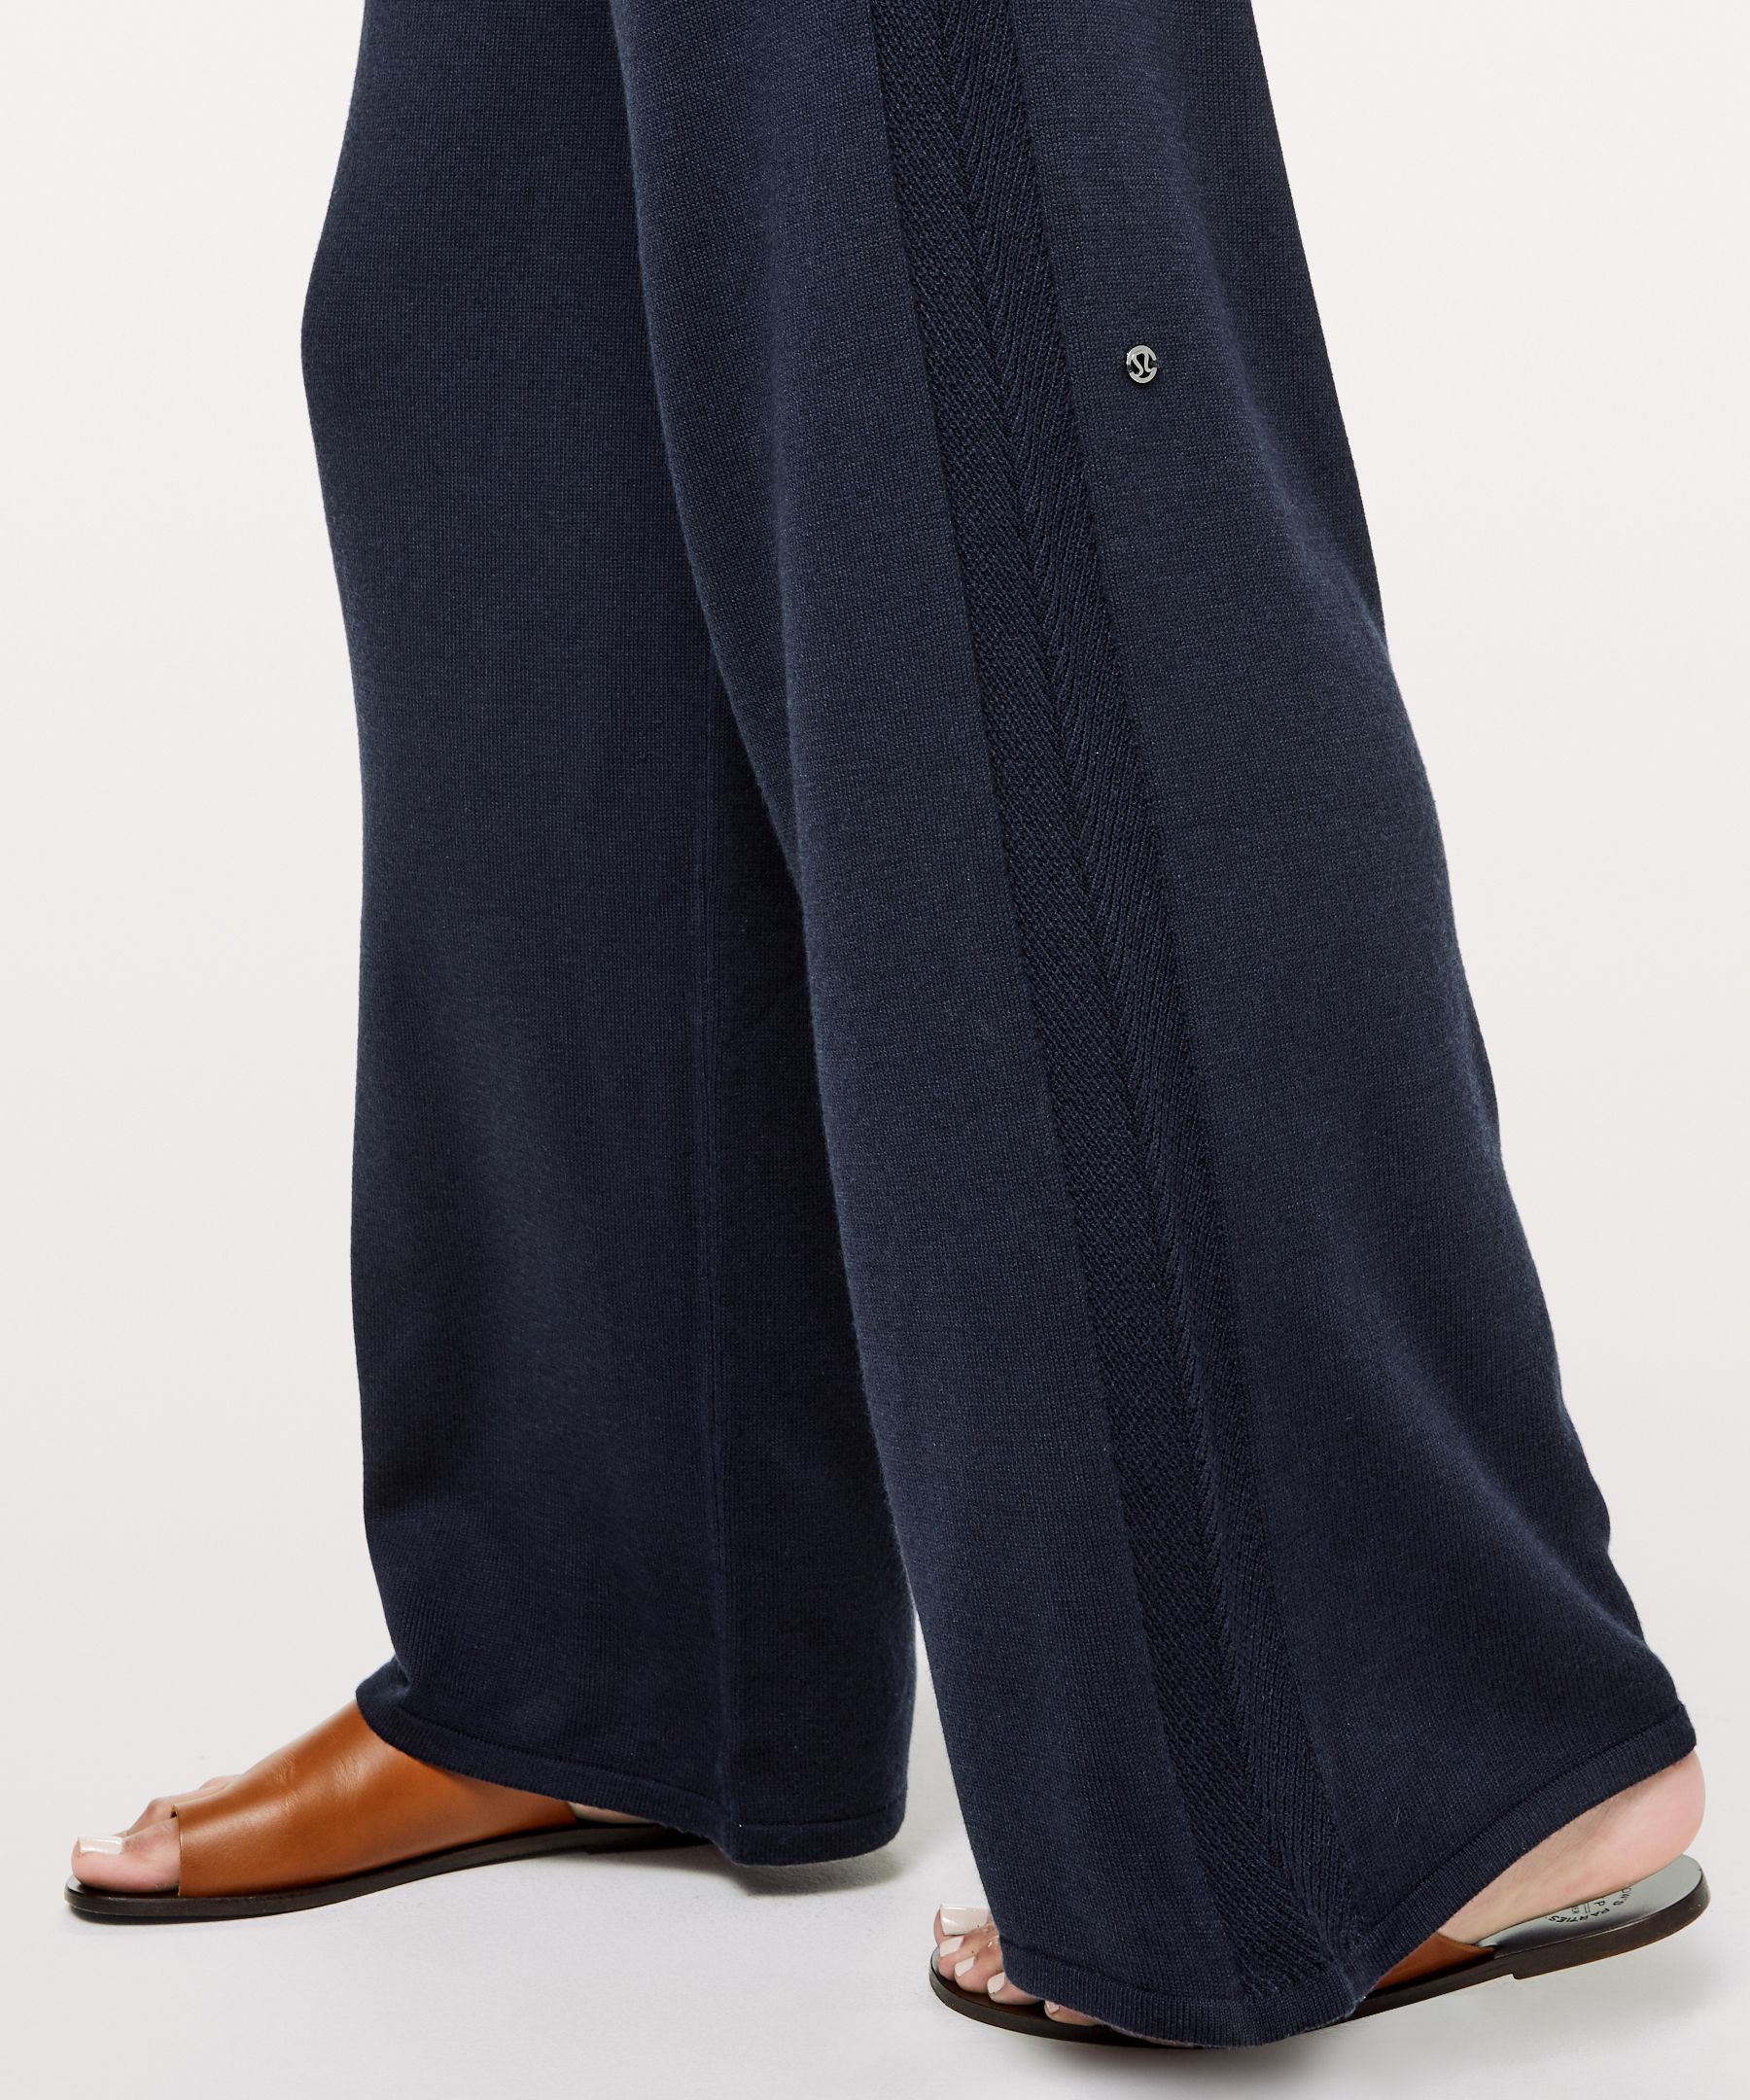 In the Comfort Zone Pant